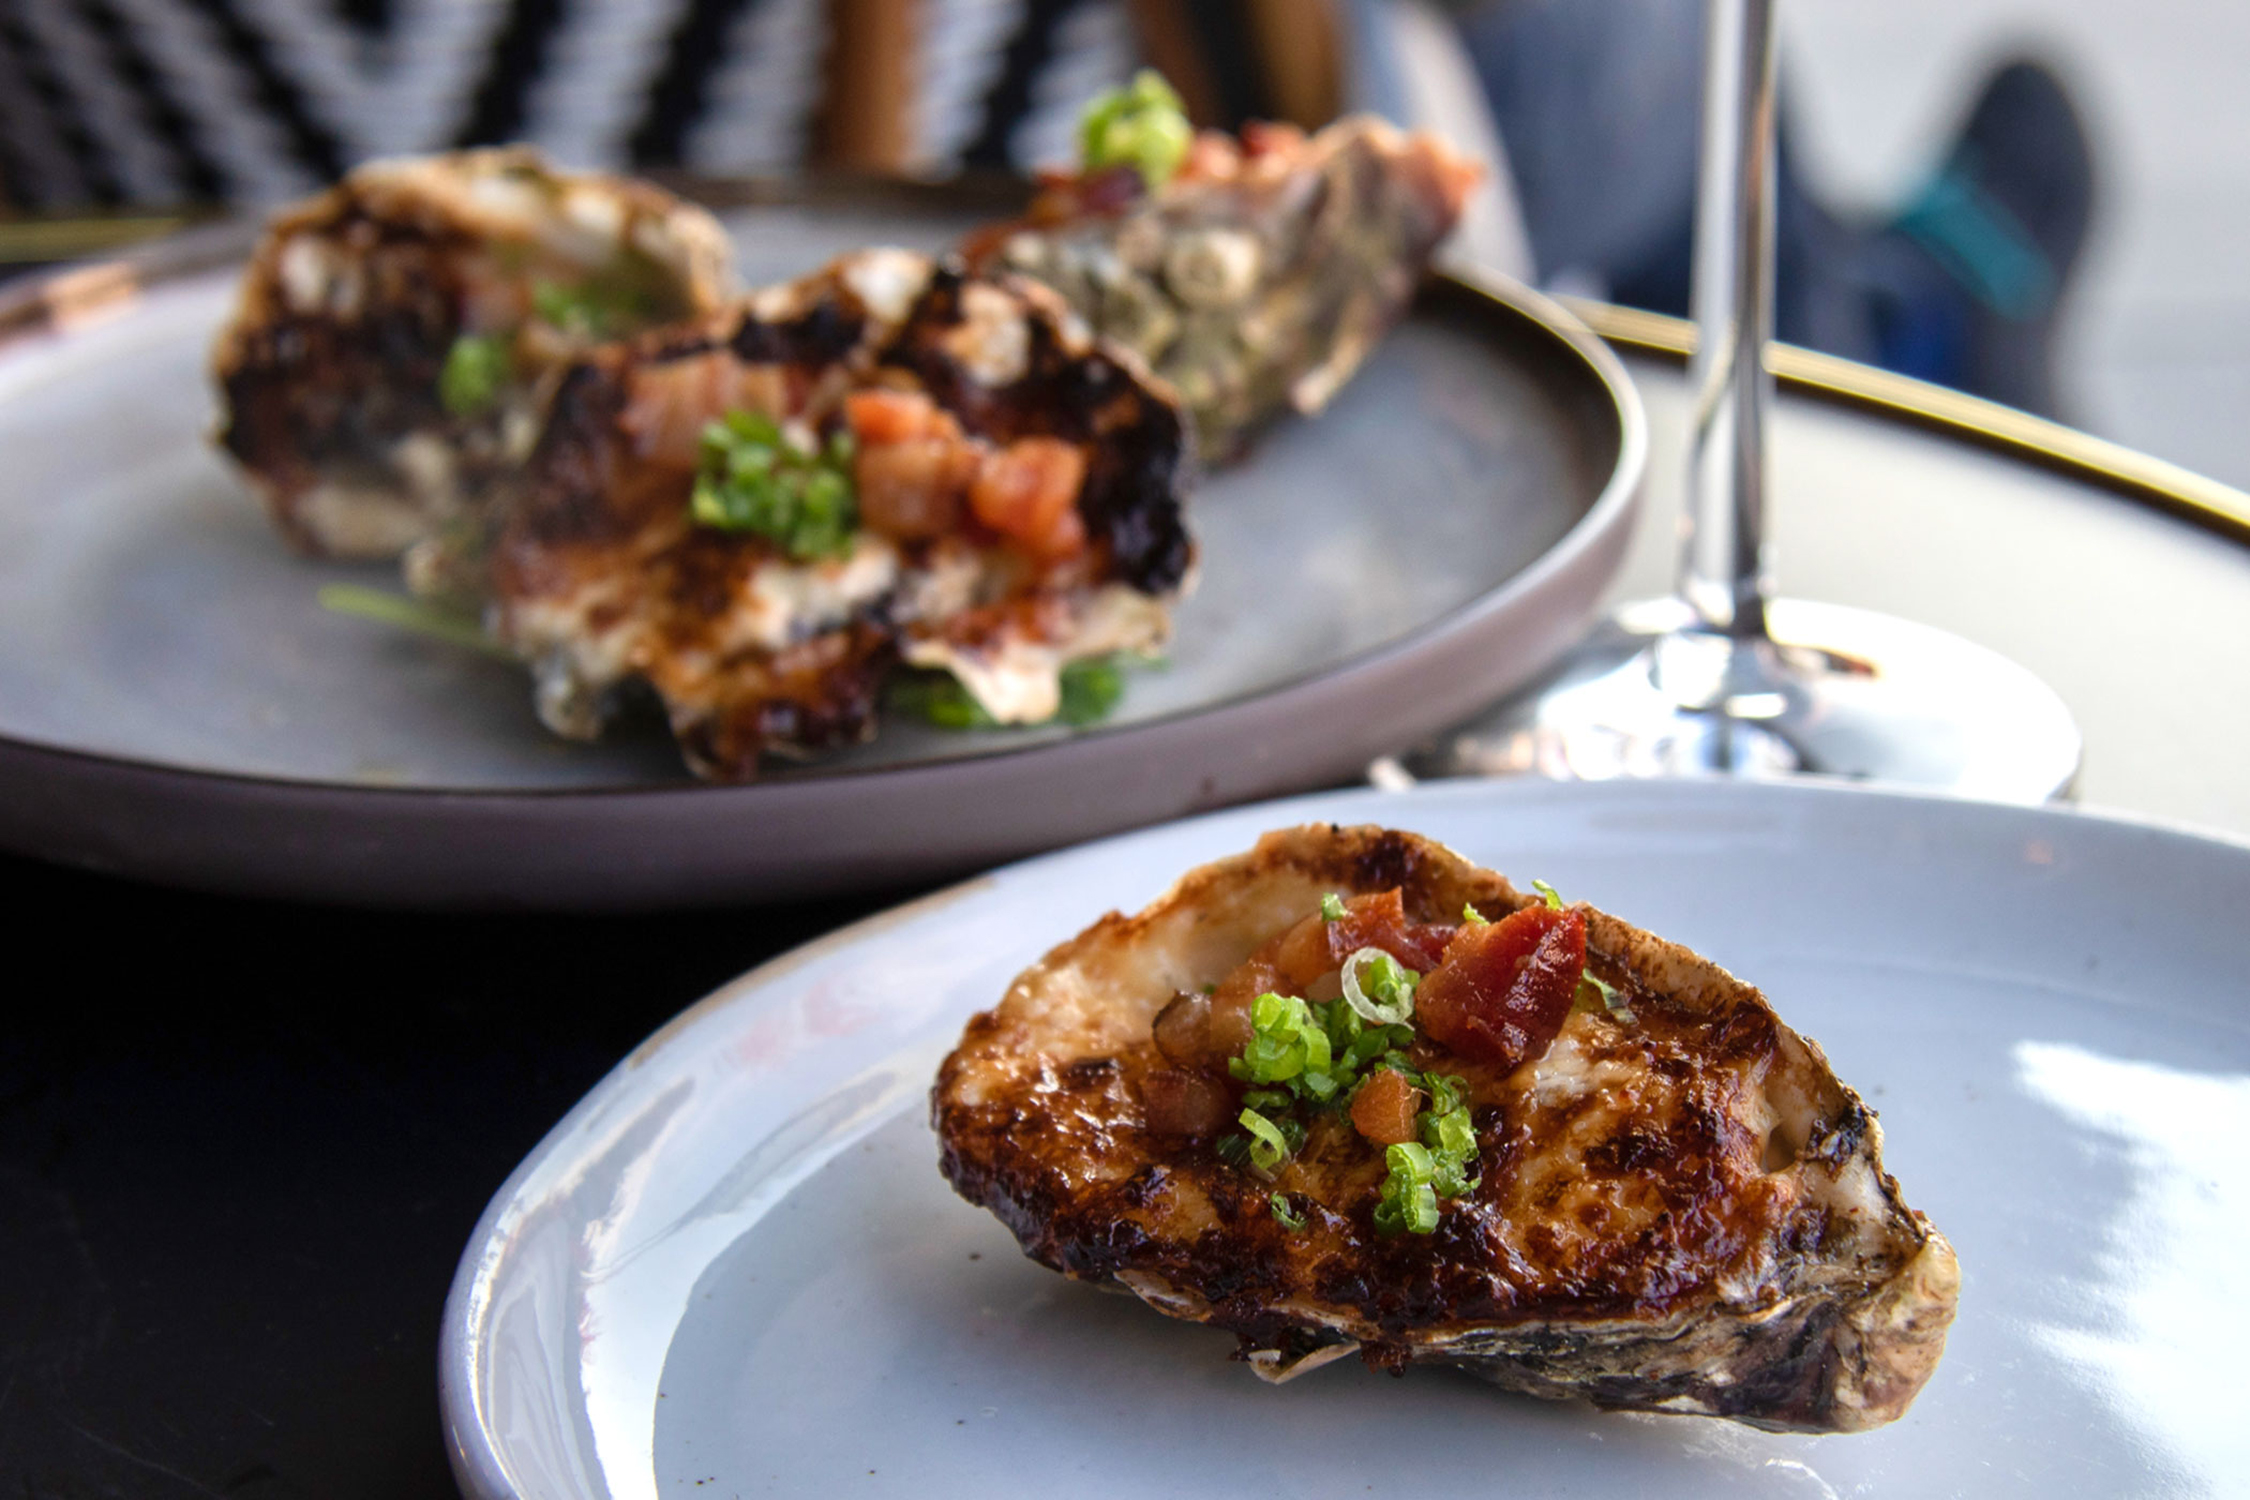 Baked oysters from Oyster Bar in Sebastopol. (Heather Irwin/Sonoma Magazine)